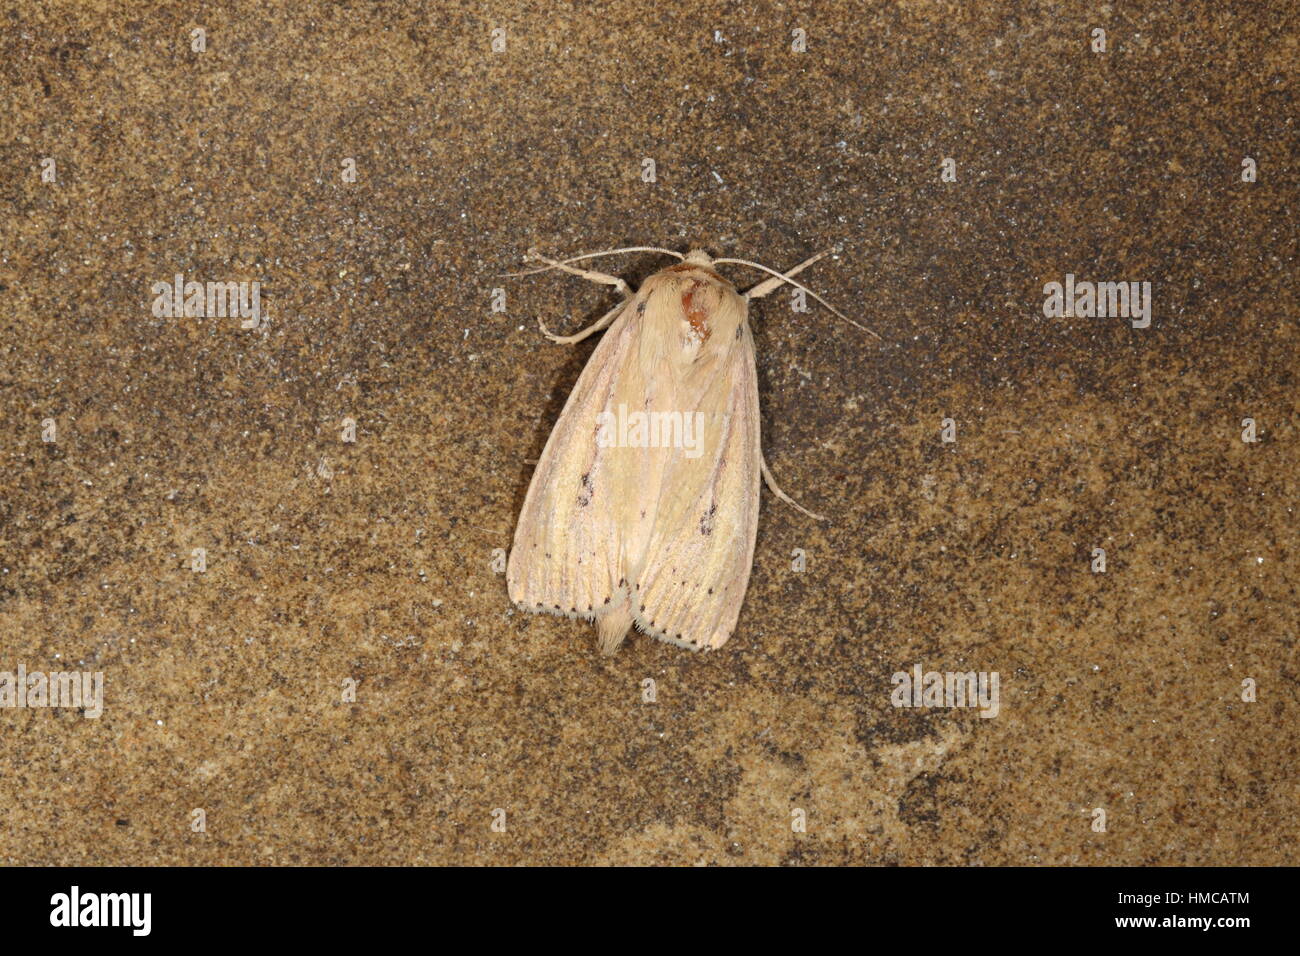 Webb's Wainscot (Globia sparganii) - a buff moth with a long abdomen that inhabits fens and marshes Stock Photo